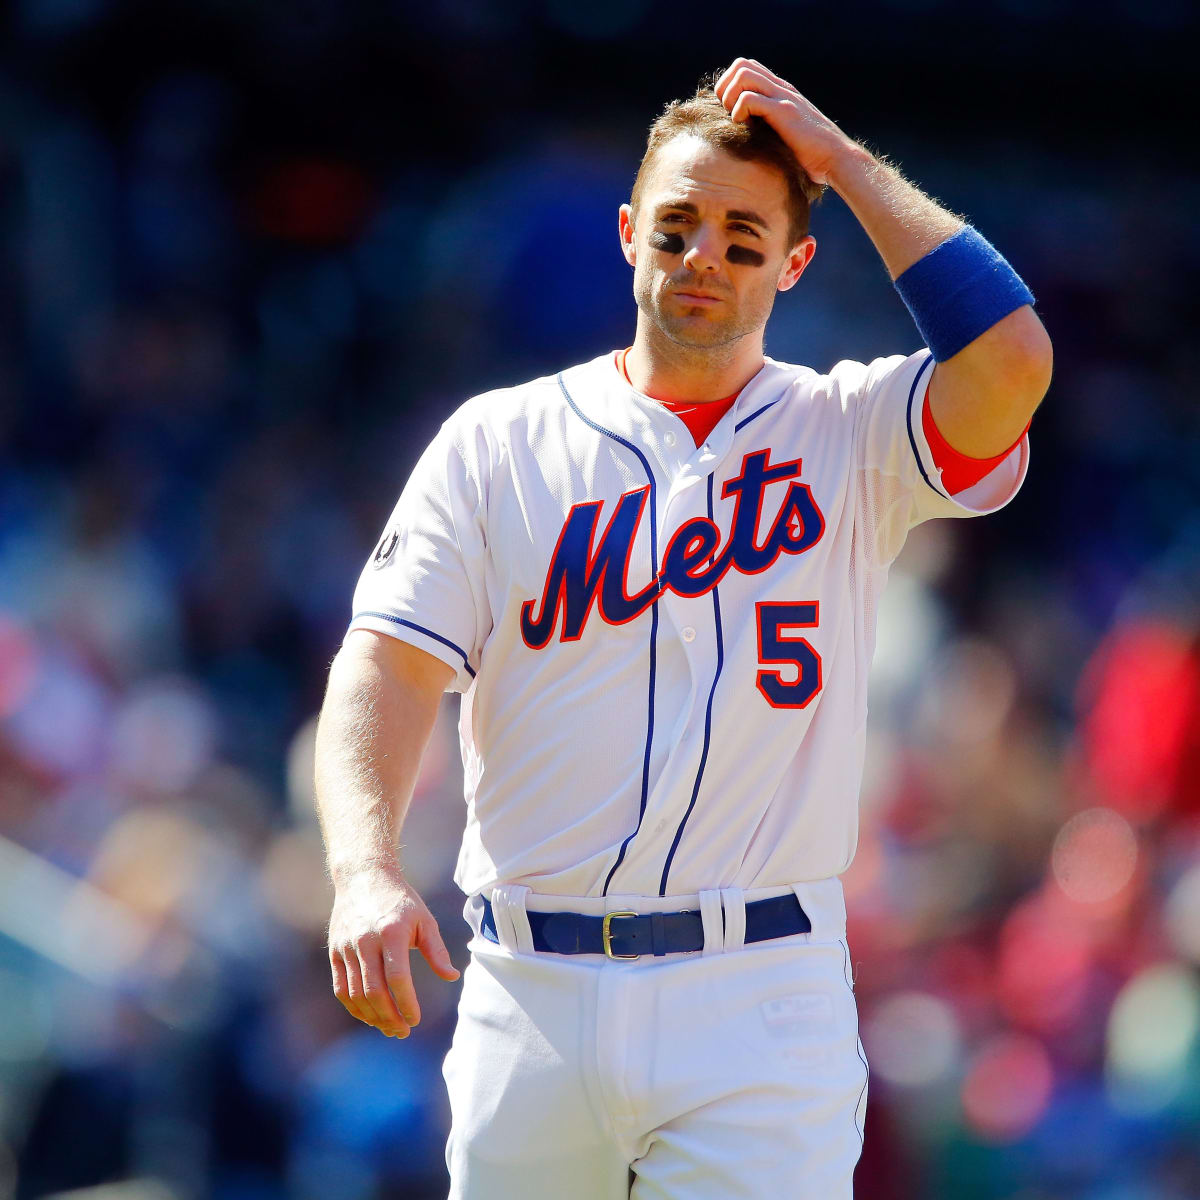 David Wright, greatest third baseman and position player in Mets